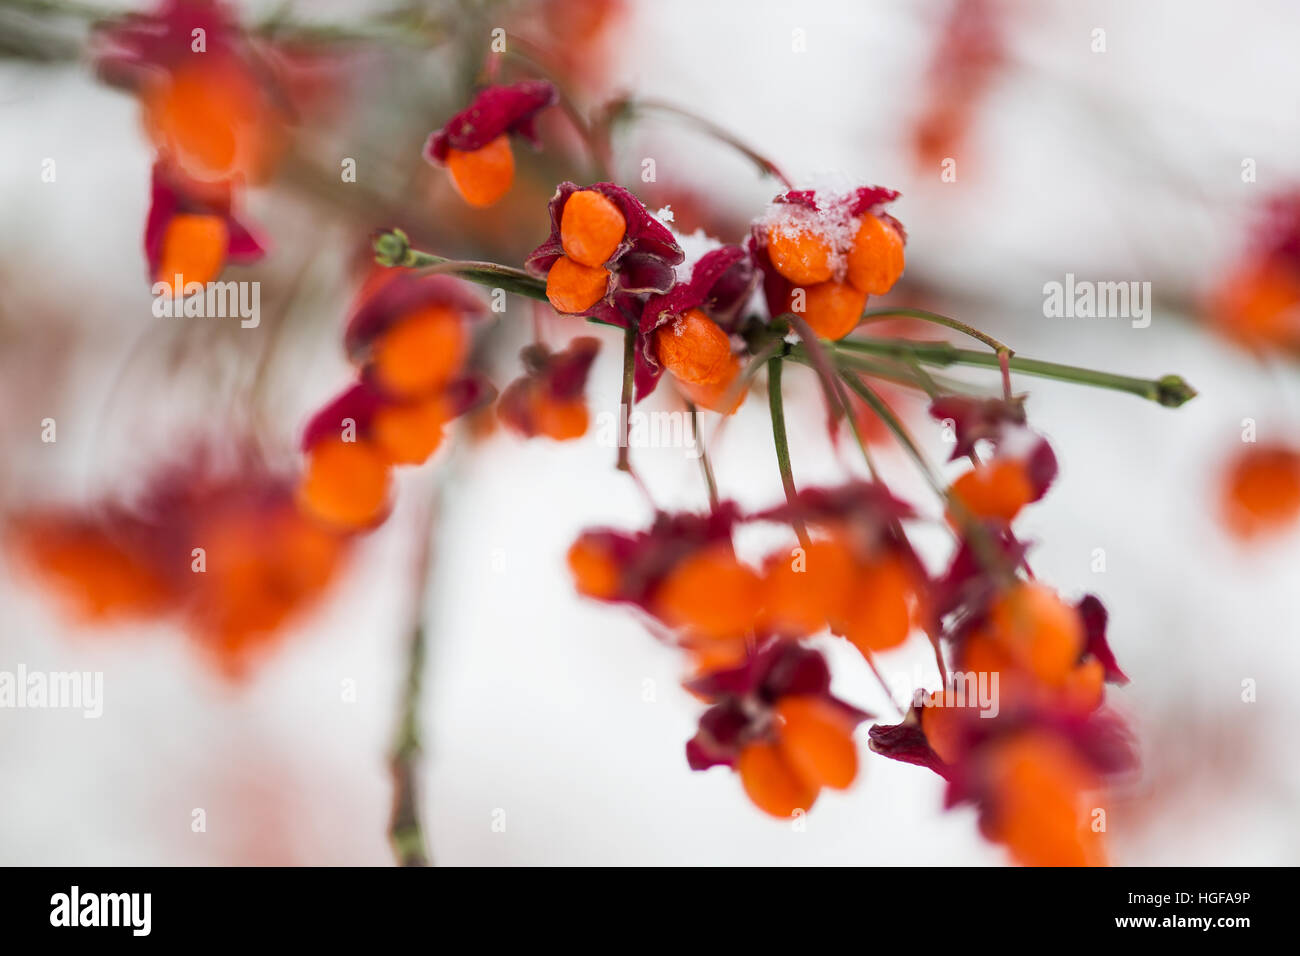 spindle or euonymus branch with fruits in winter Stock Photo